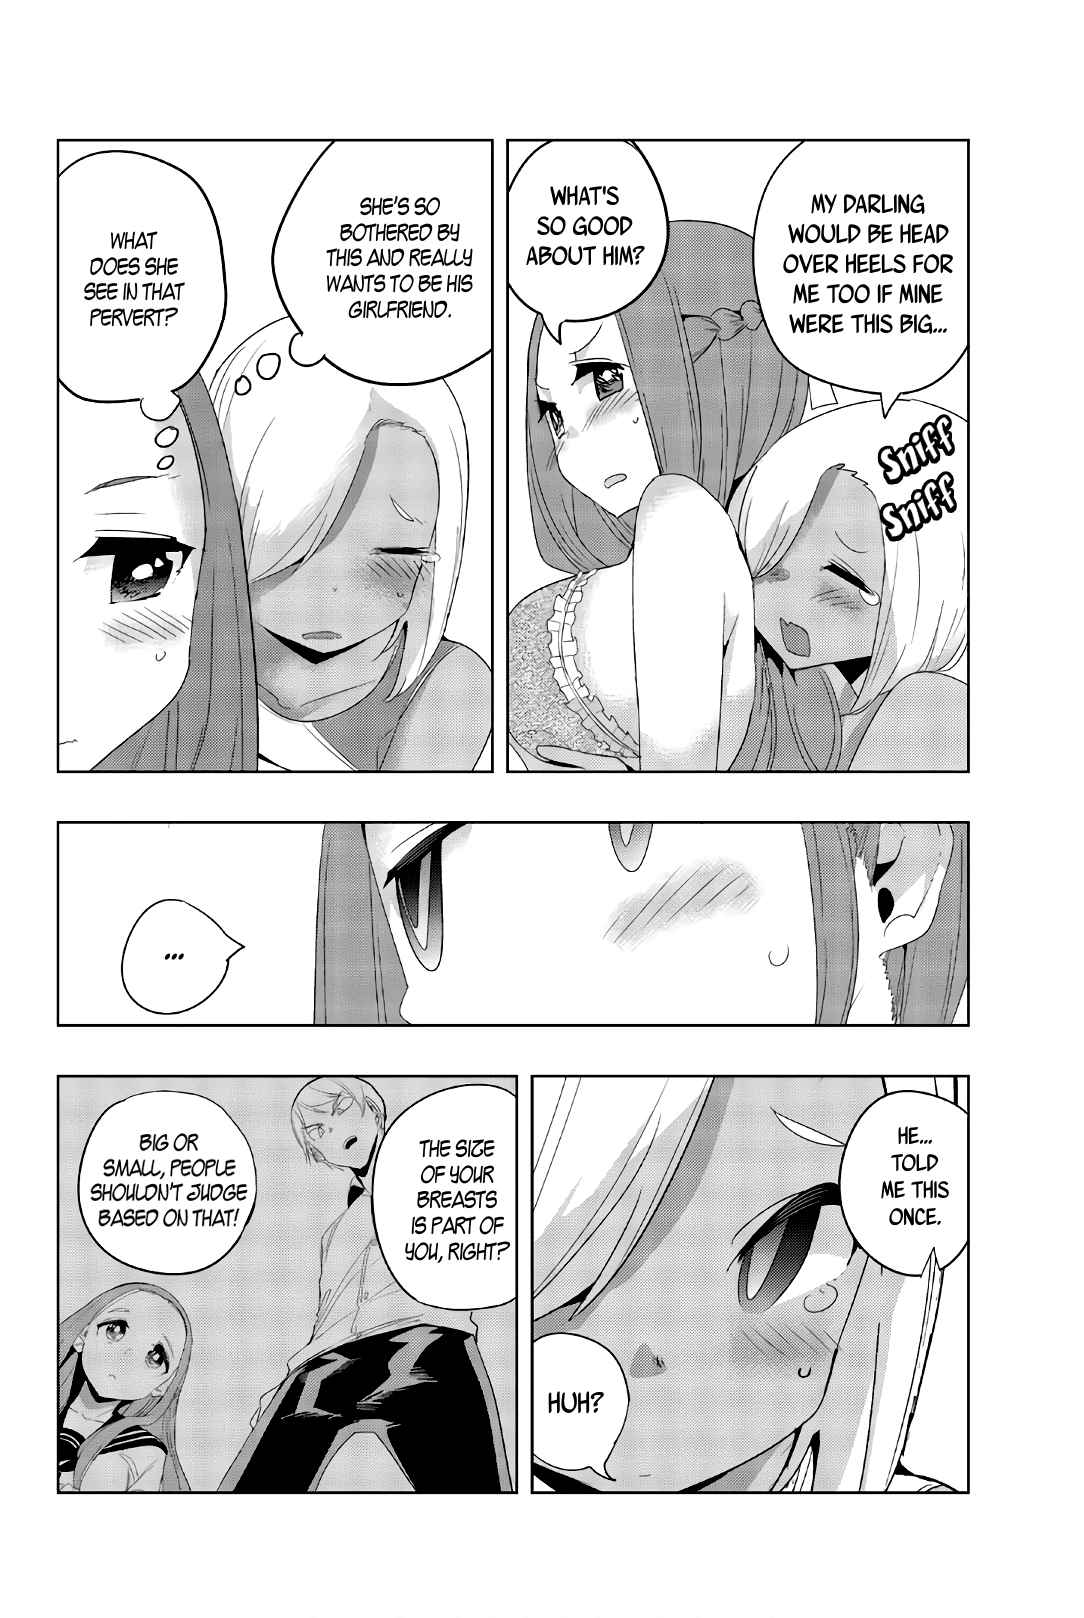 Houkago no Goumon Shoujo Vol. 3 Ch. 37.5 Yearned and Coveted Boob Energy